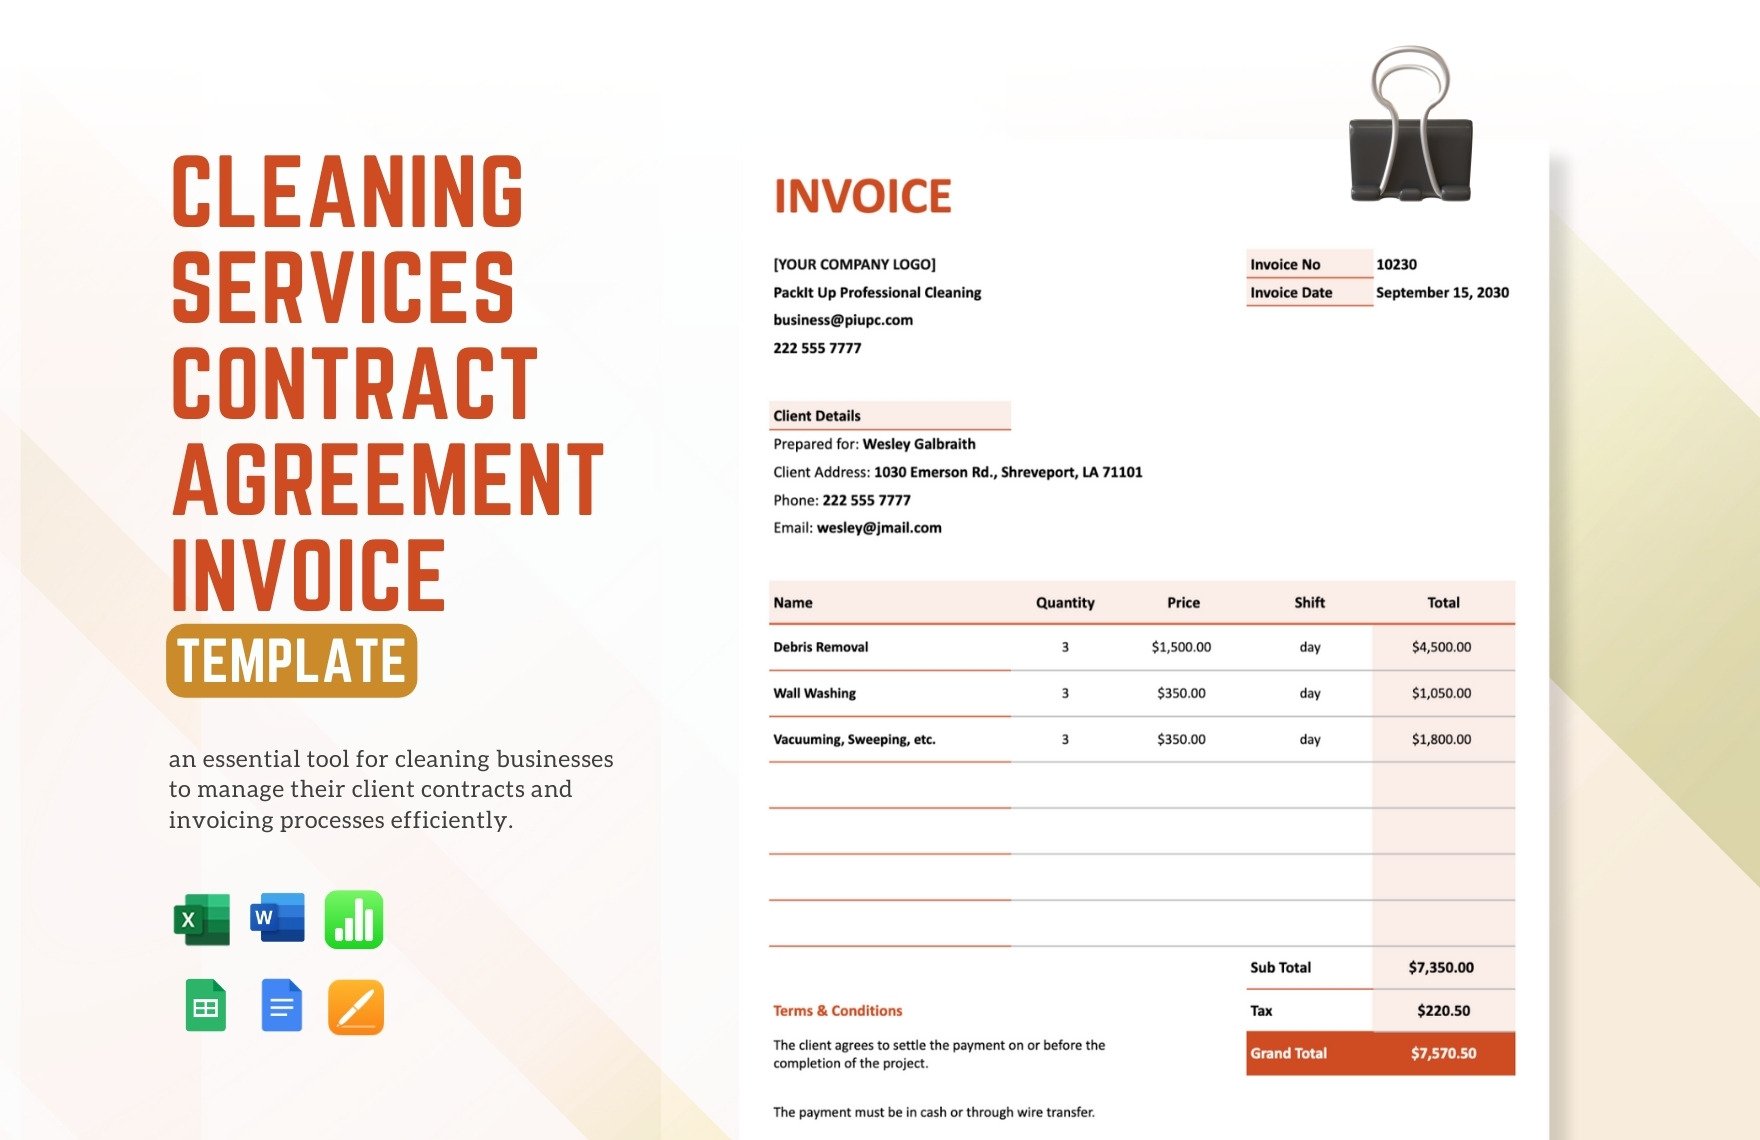 Free Cleaning Services Contract Agreement Invoice Template in Word, Google Docs, Excel, Google Sheets, Apple Pages, Apple Numbers